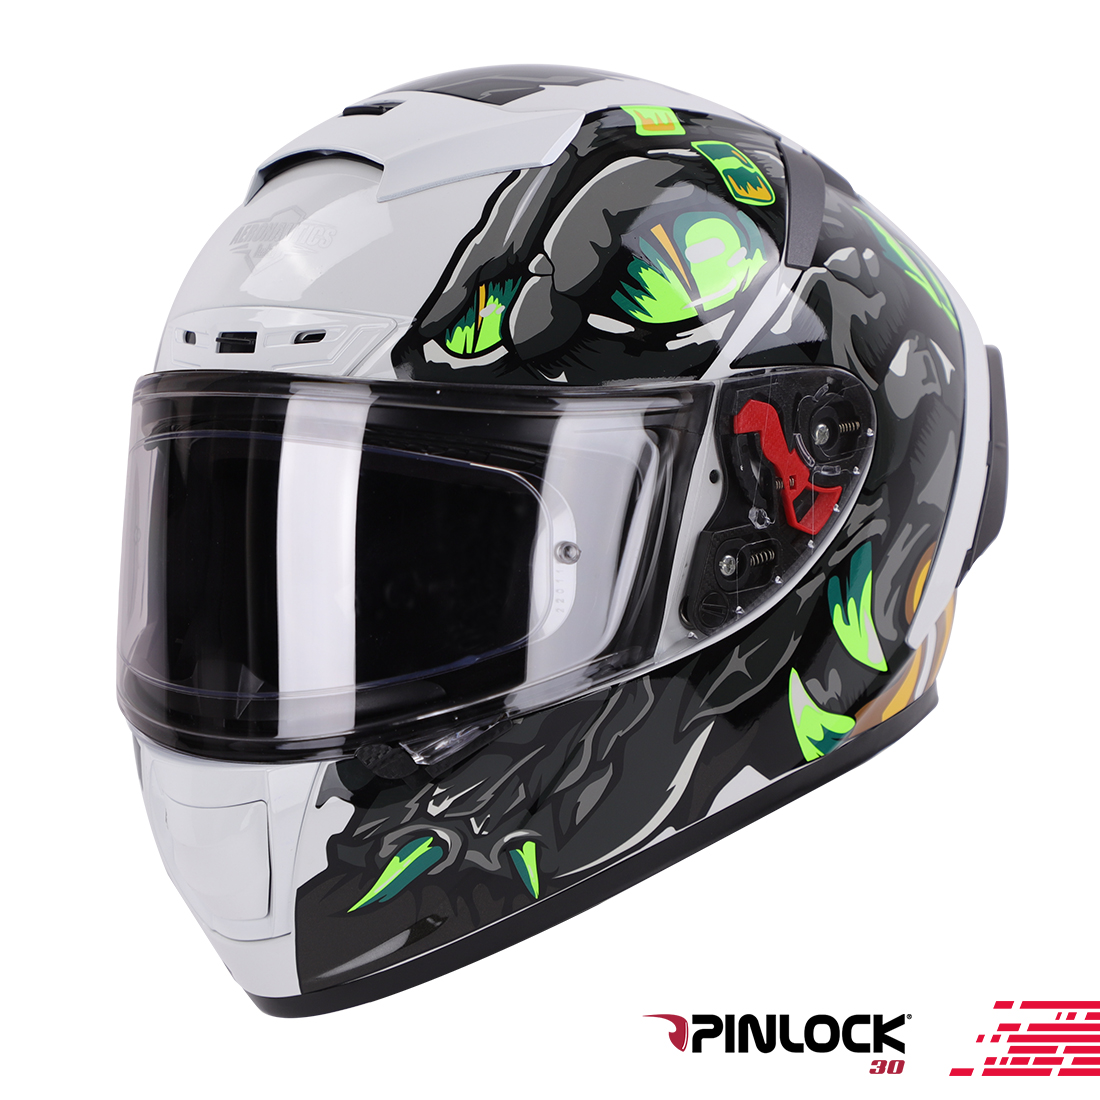 Steelbird SA-5 Monster ISI/DOT Certified Full Face Graphic Helmet With Outer Anti-Fog Clear Visor (Glossy White Grey)